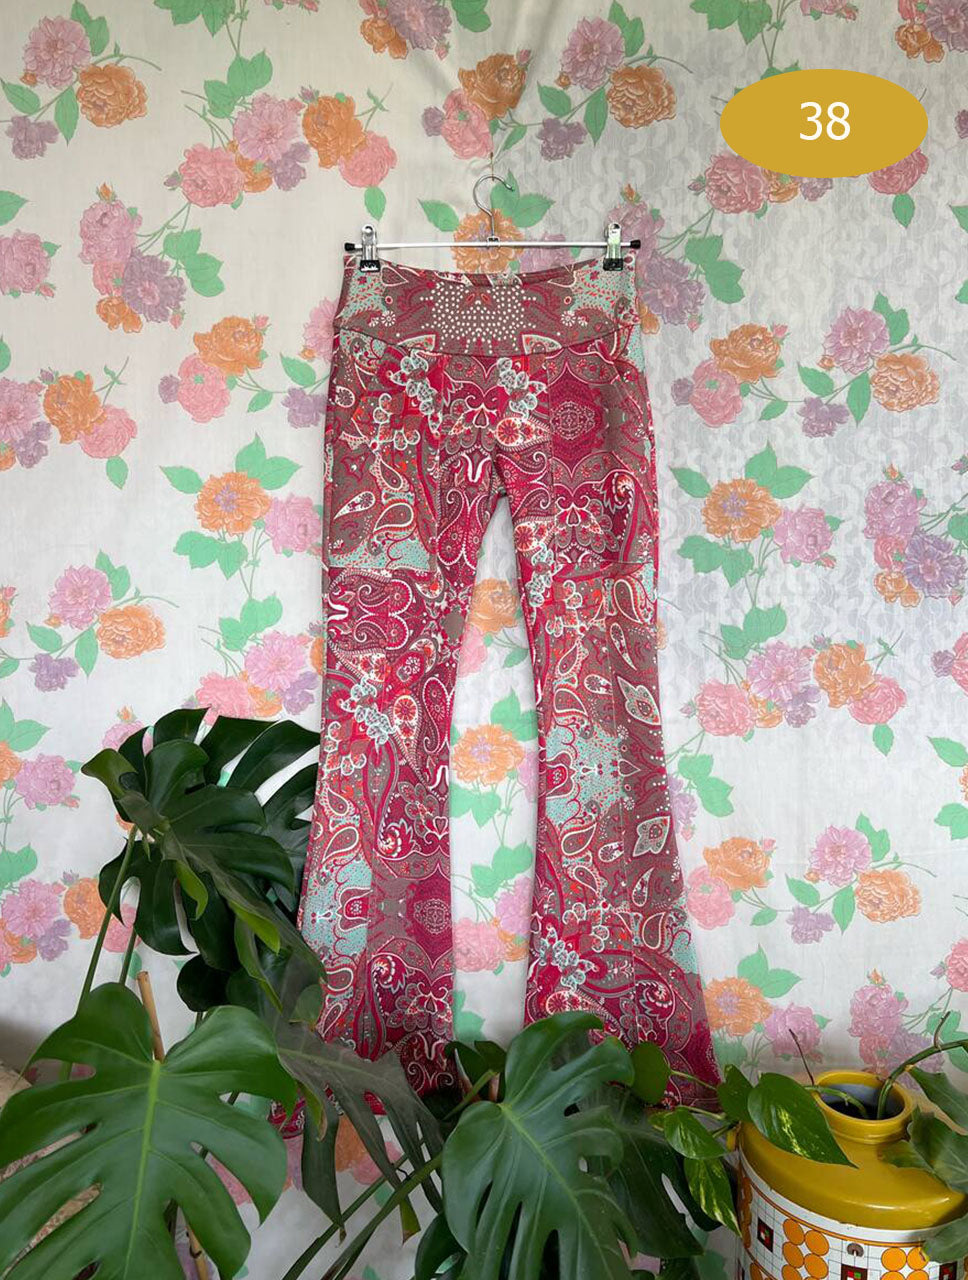 2000s Floral Elastic Flare Pants